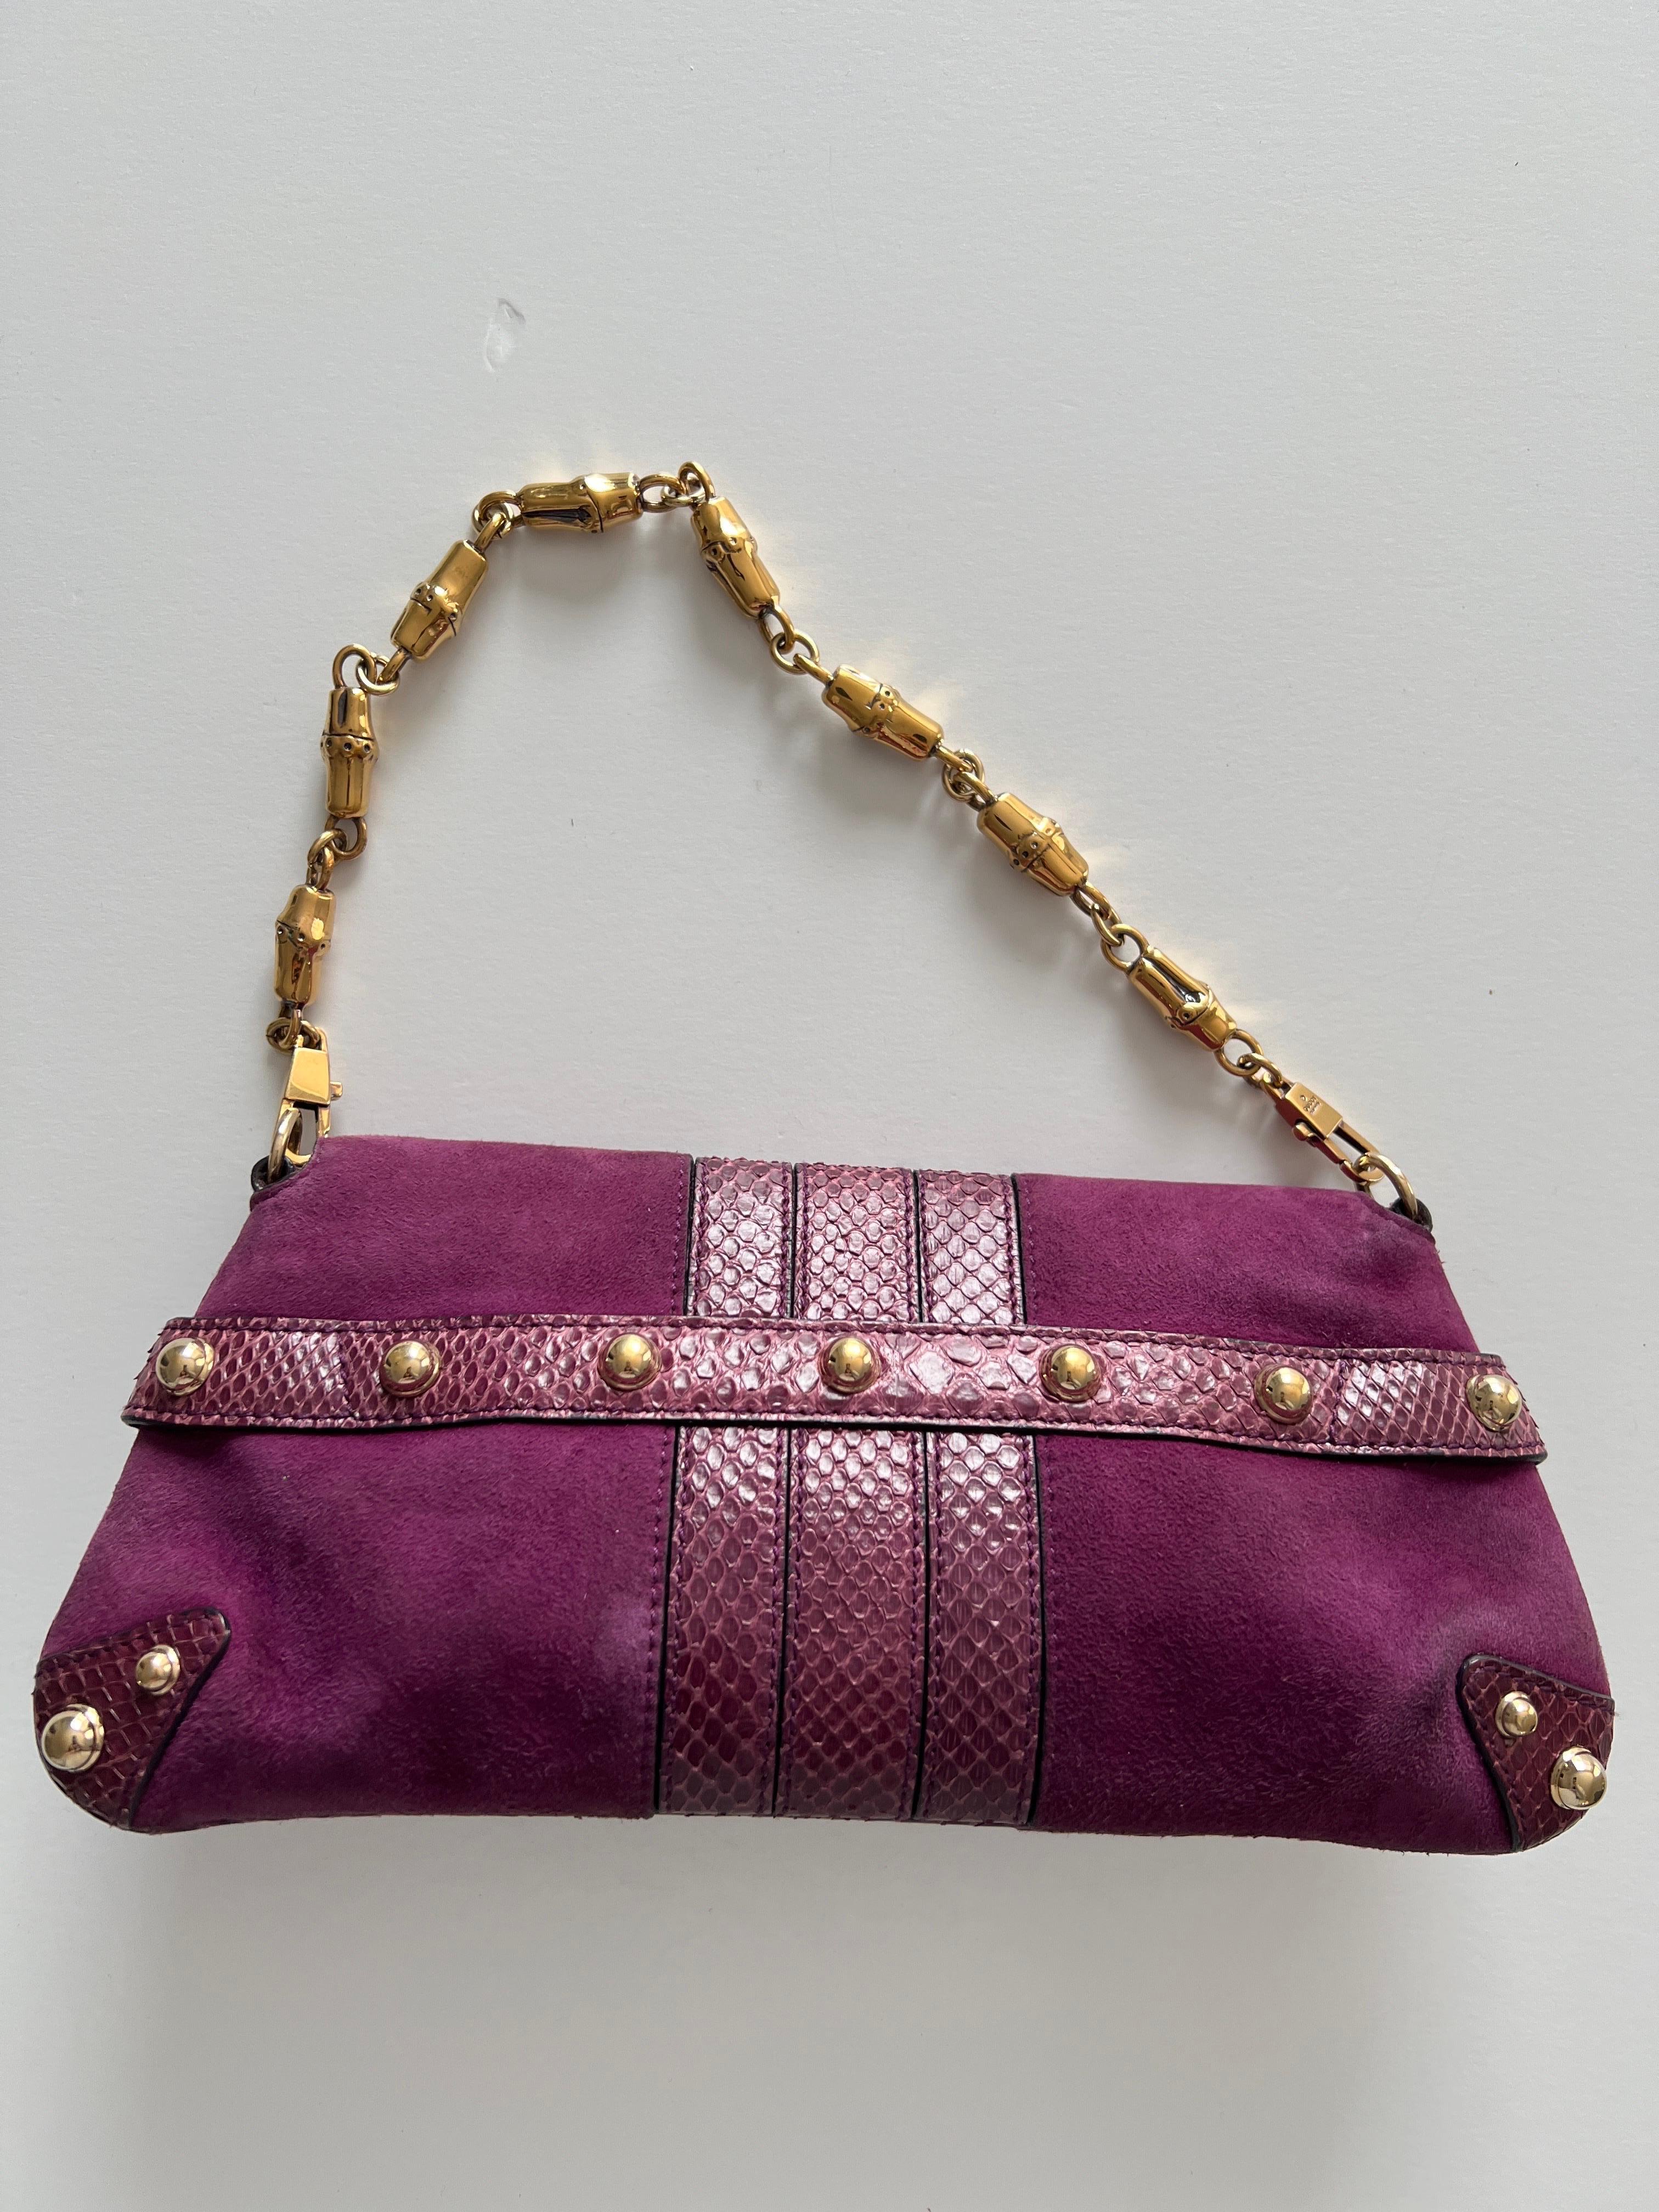 This adorable Gucci Purple Suede and Snakeskin Horsebit Chain Bag features gorgeous purple suede with snakeskin trim. The bag has purple enamel and a gold-tone chain strap. It makes a perfect evening bag and can hold all your girly essentials, such